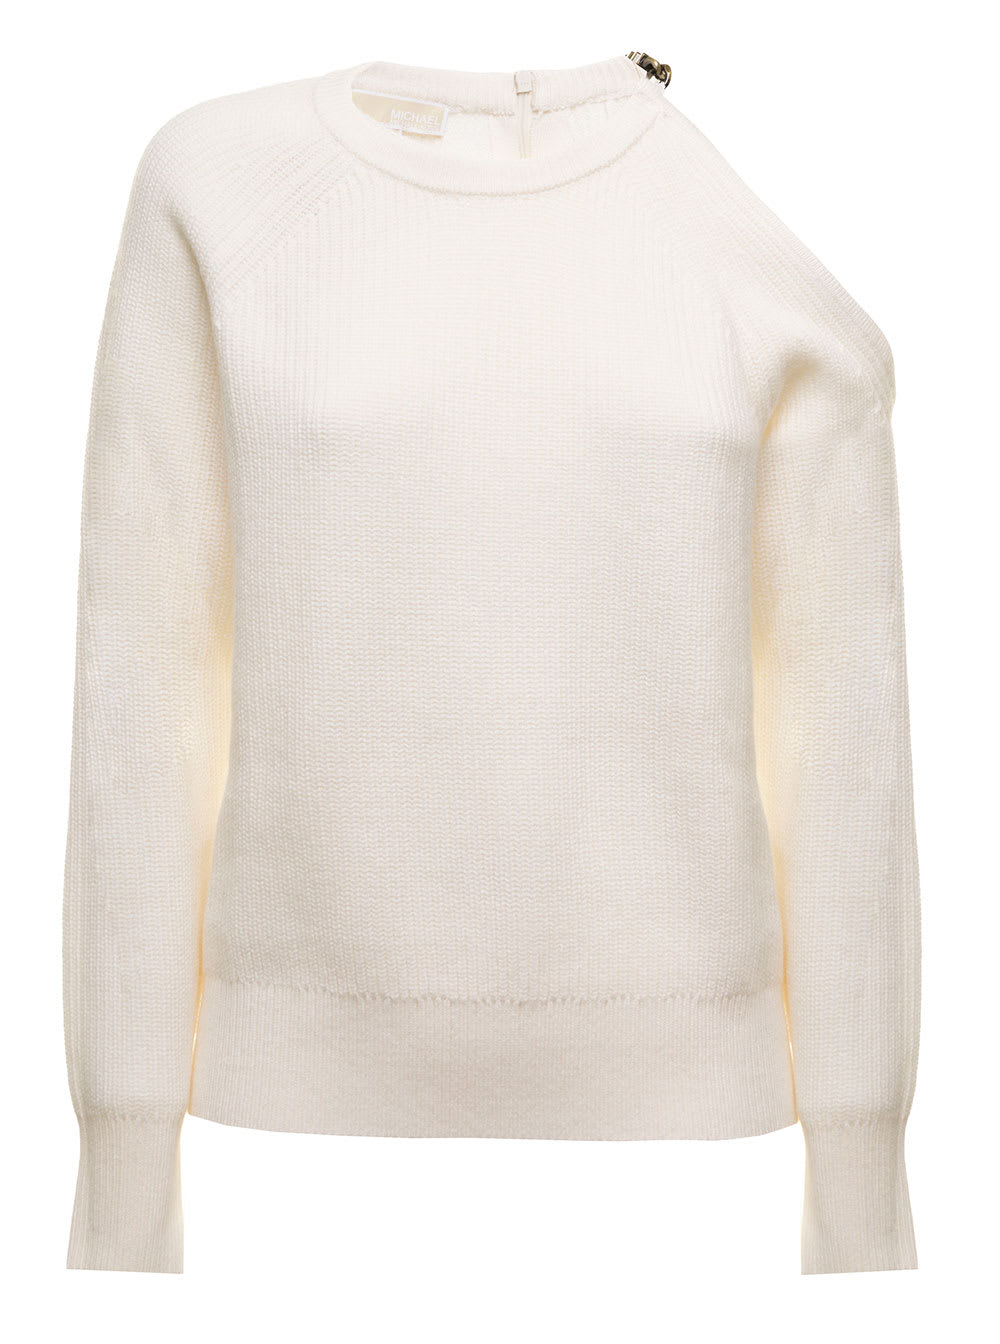 MICHAEL Michael Kors M Michael Kors Womans White Merino Wool Sweater With Cut Out Detail On The Shoulder And Metal Logo